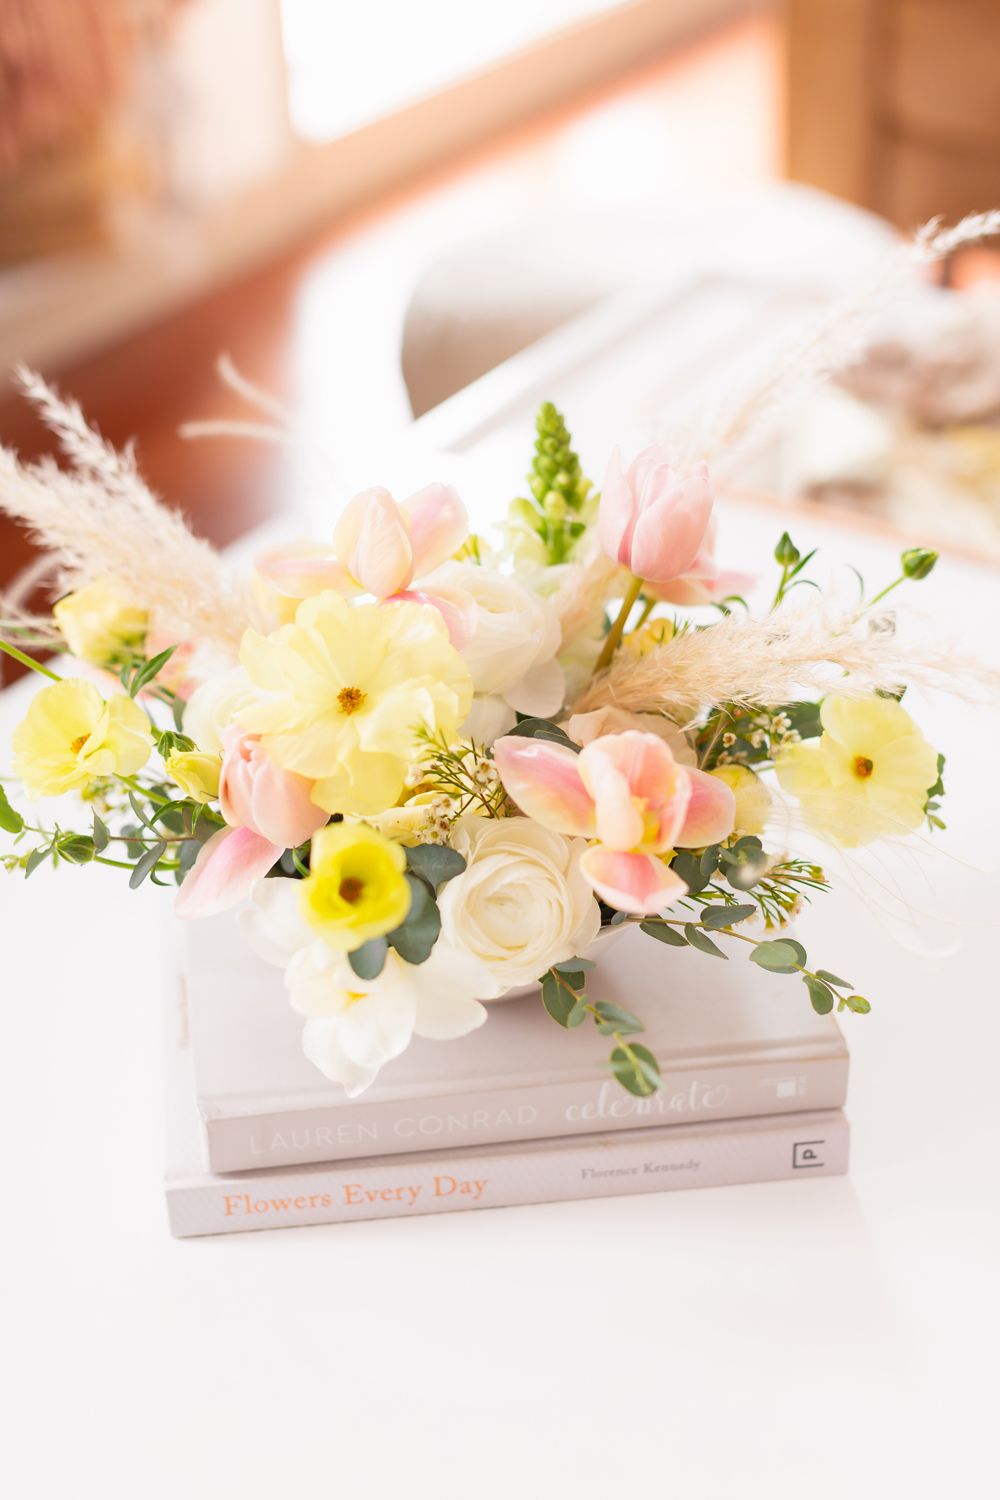 A Pastel Easter Flower Arrangement featuring Quicksand and Spray Roses, Ranunculus and Butterfly Ranunculus, Tulips, Hyacinths, Lisianthus, Eucalyptus, Wax Flowers and Pampas Grass | Calgary Lifestyle Blogger // JustineCelina.com